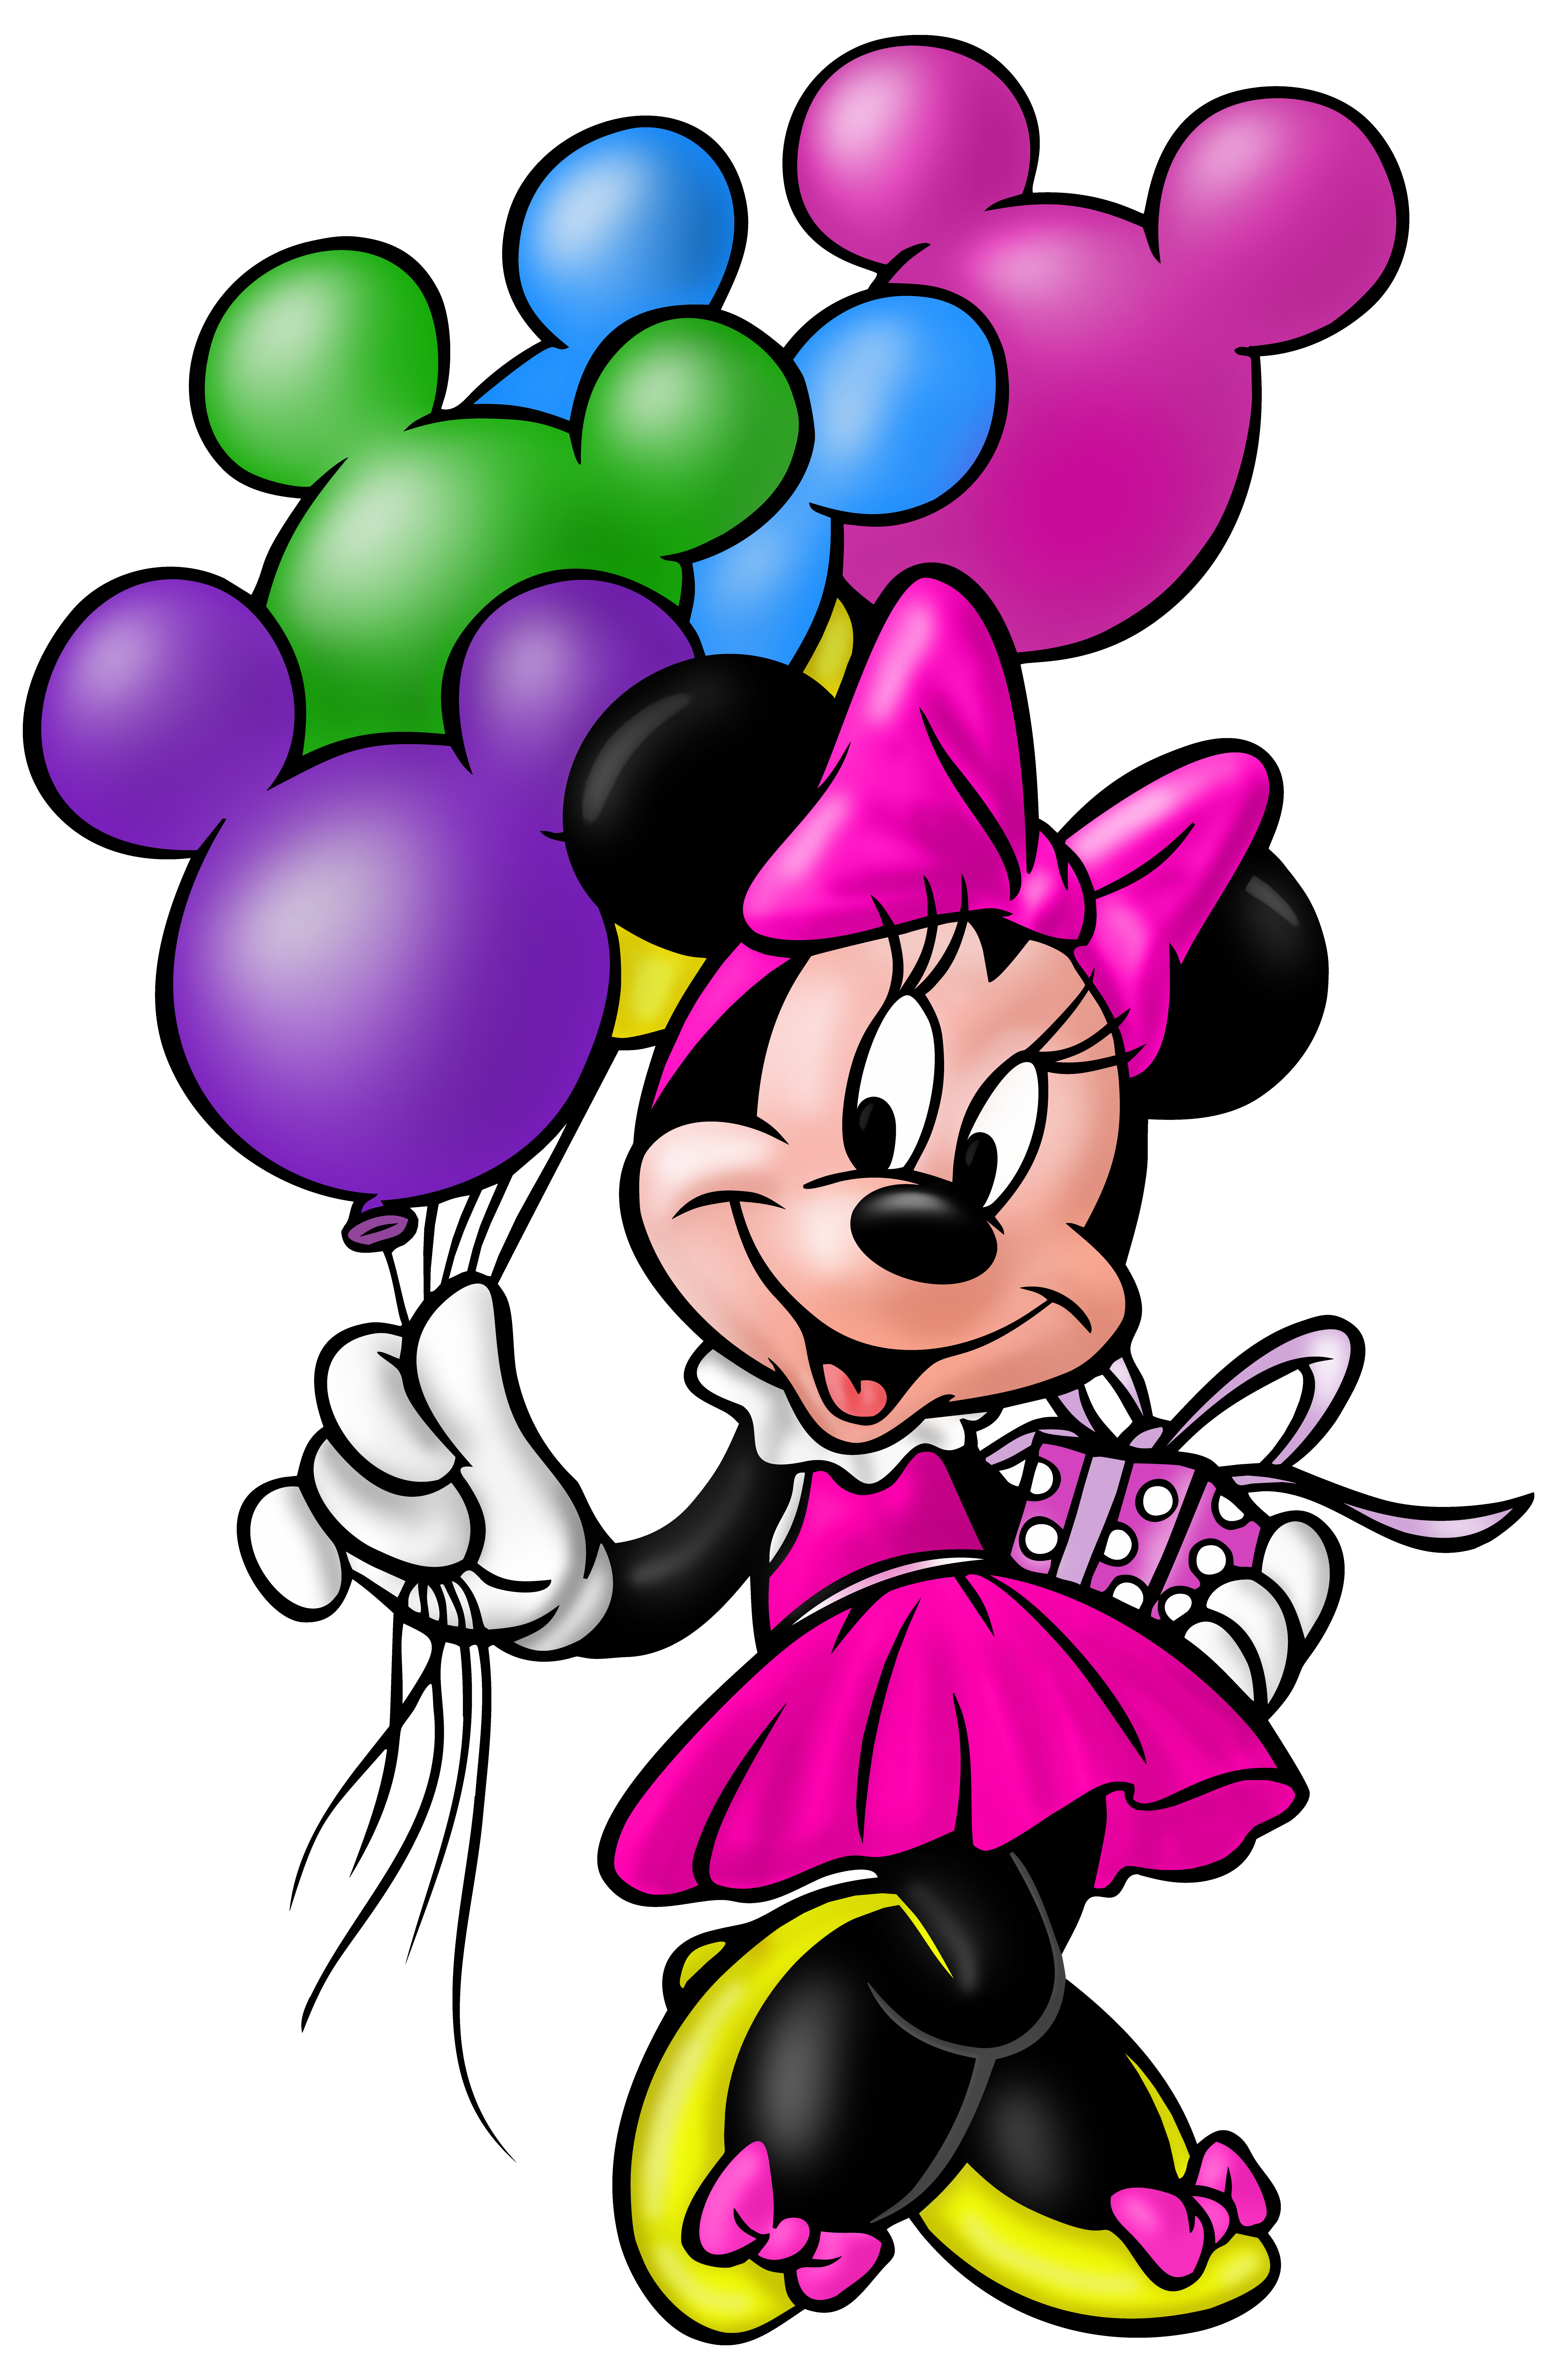 Minnie Mouse Transparent Png Clip Art Image Gallery Yopriceville High Quality Images And Transparent Png Free Clipart